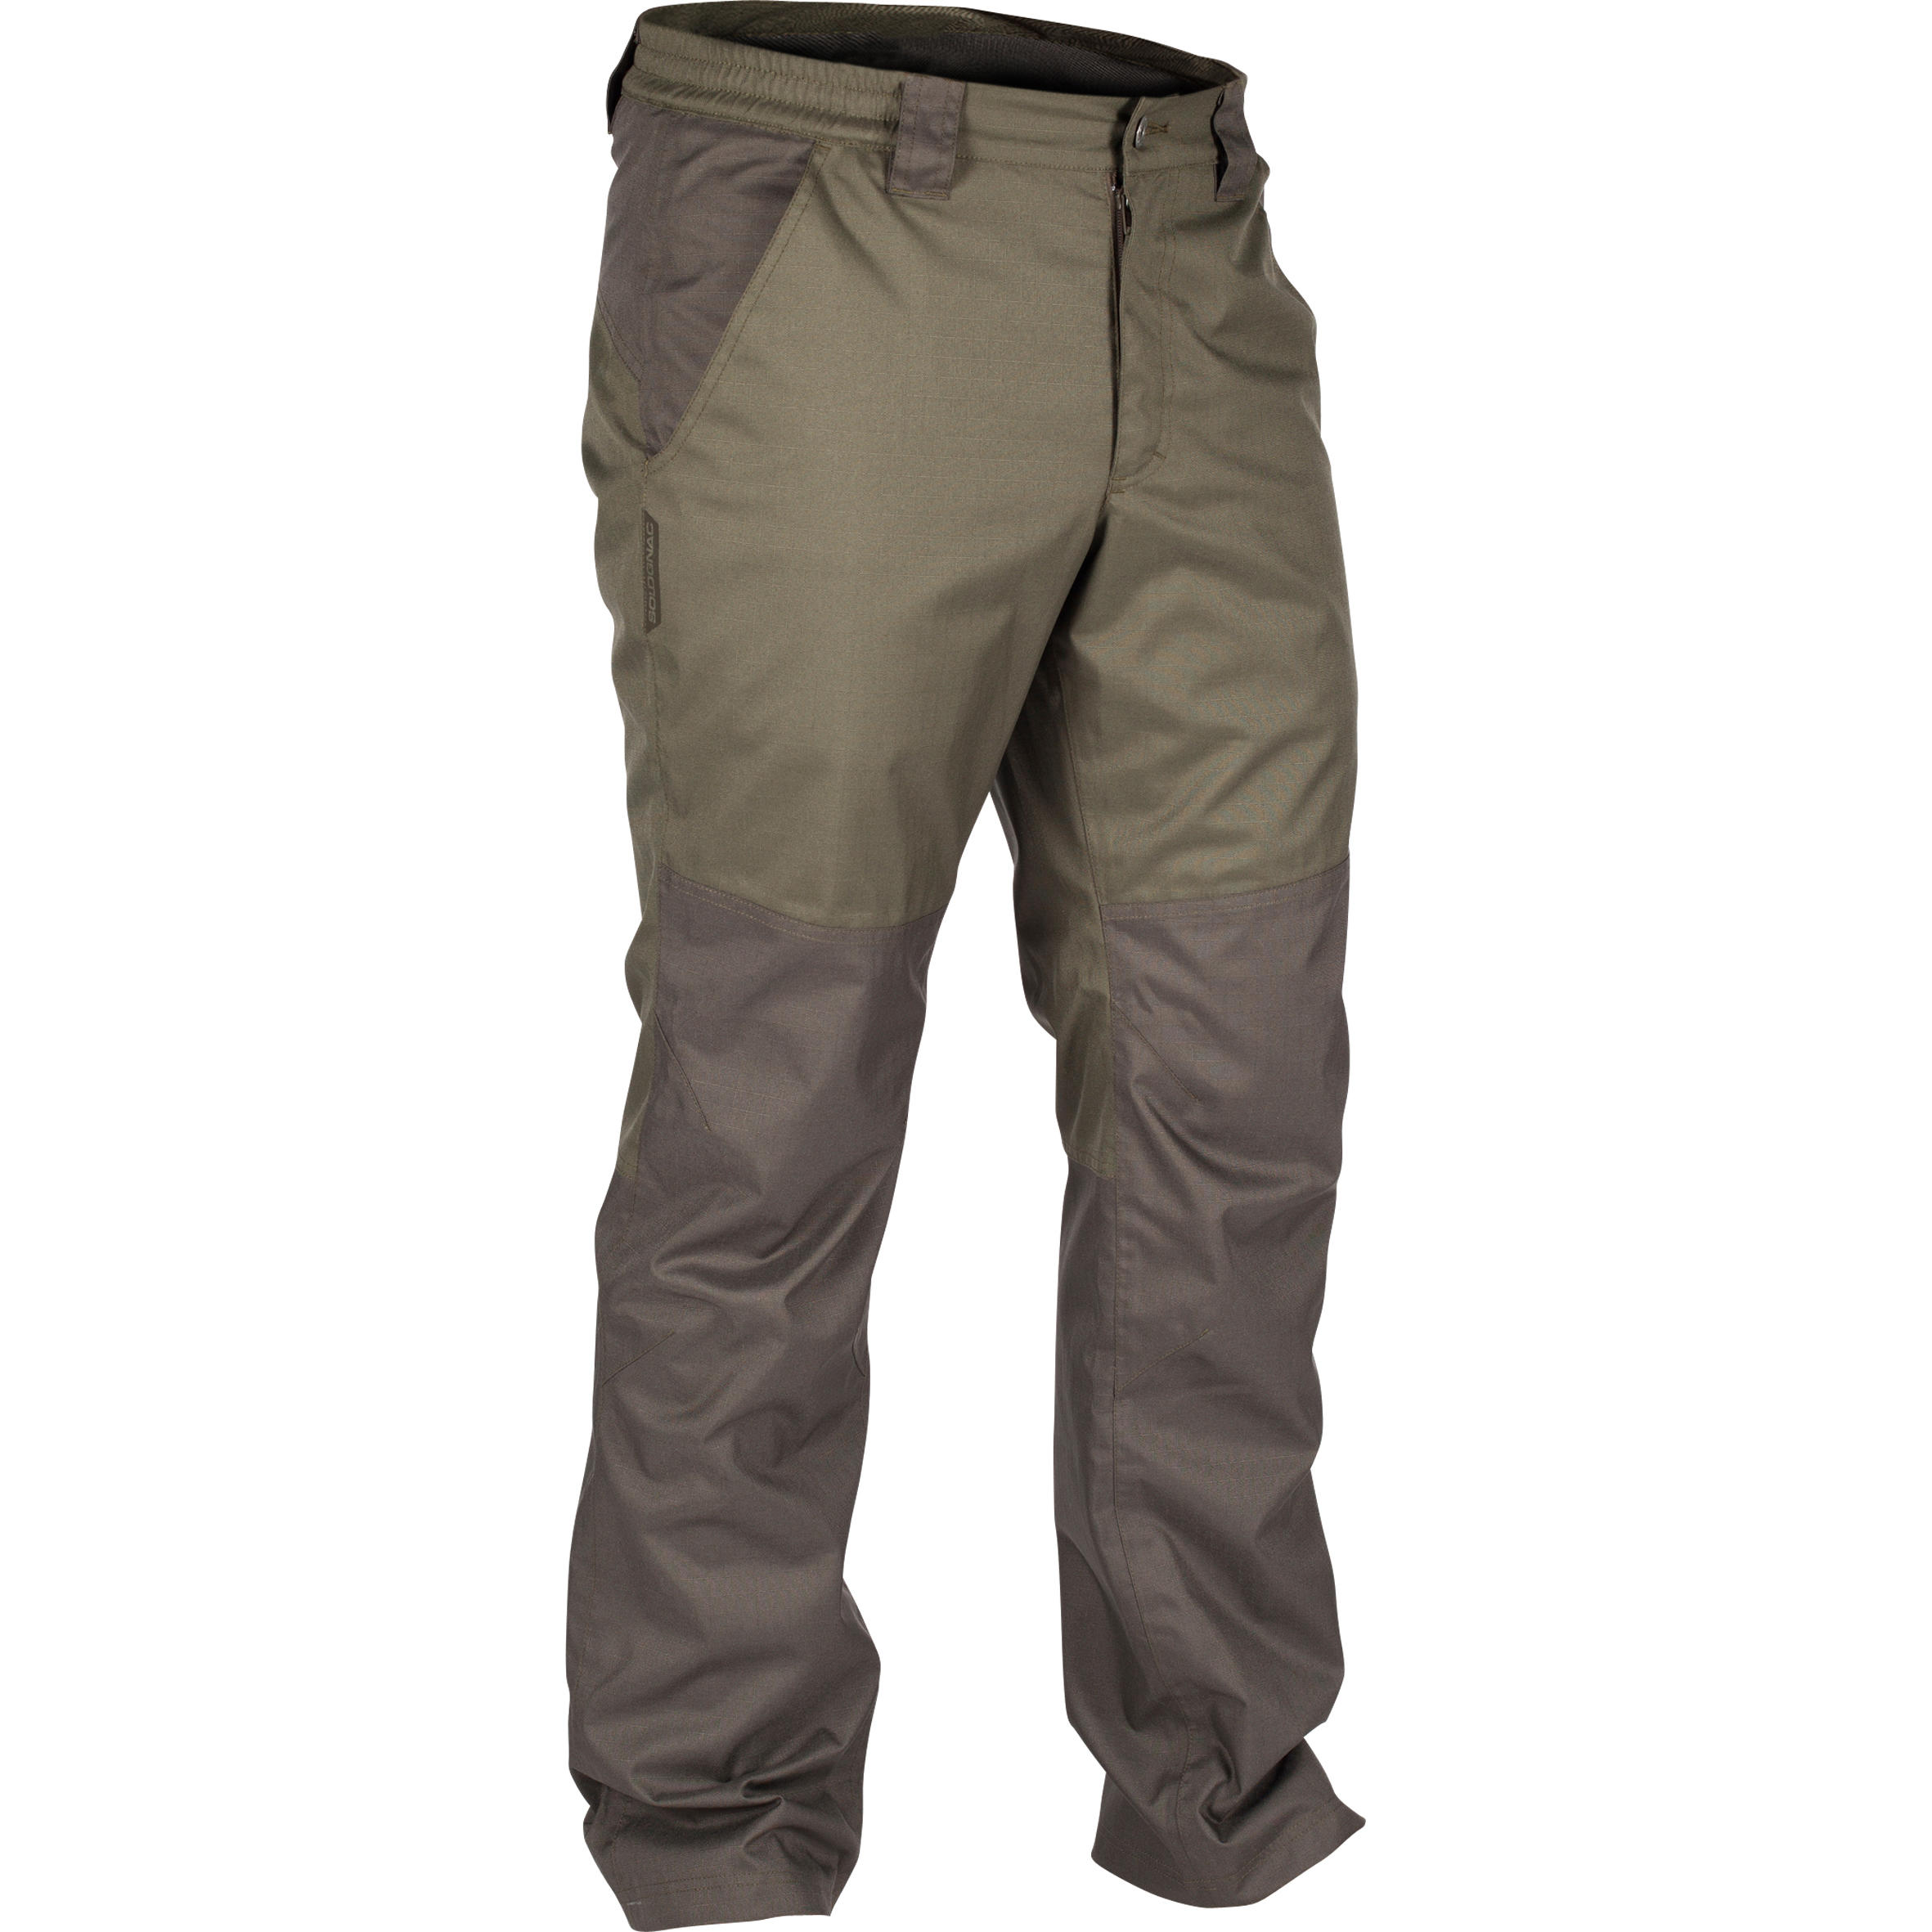 Mens Camping Outdoor Walking Durable Utility Trousers Pants 500 Solognac |  eBay